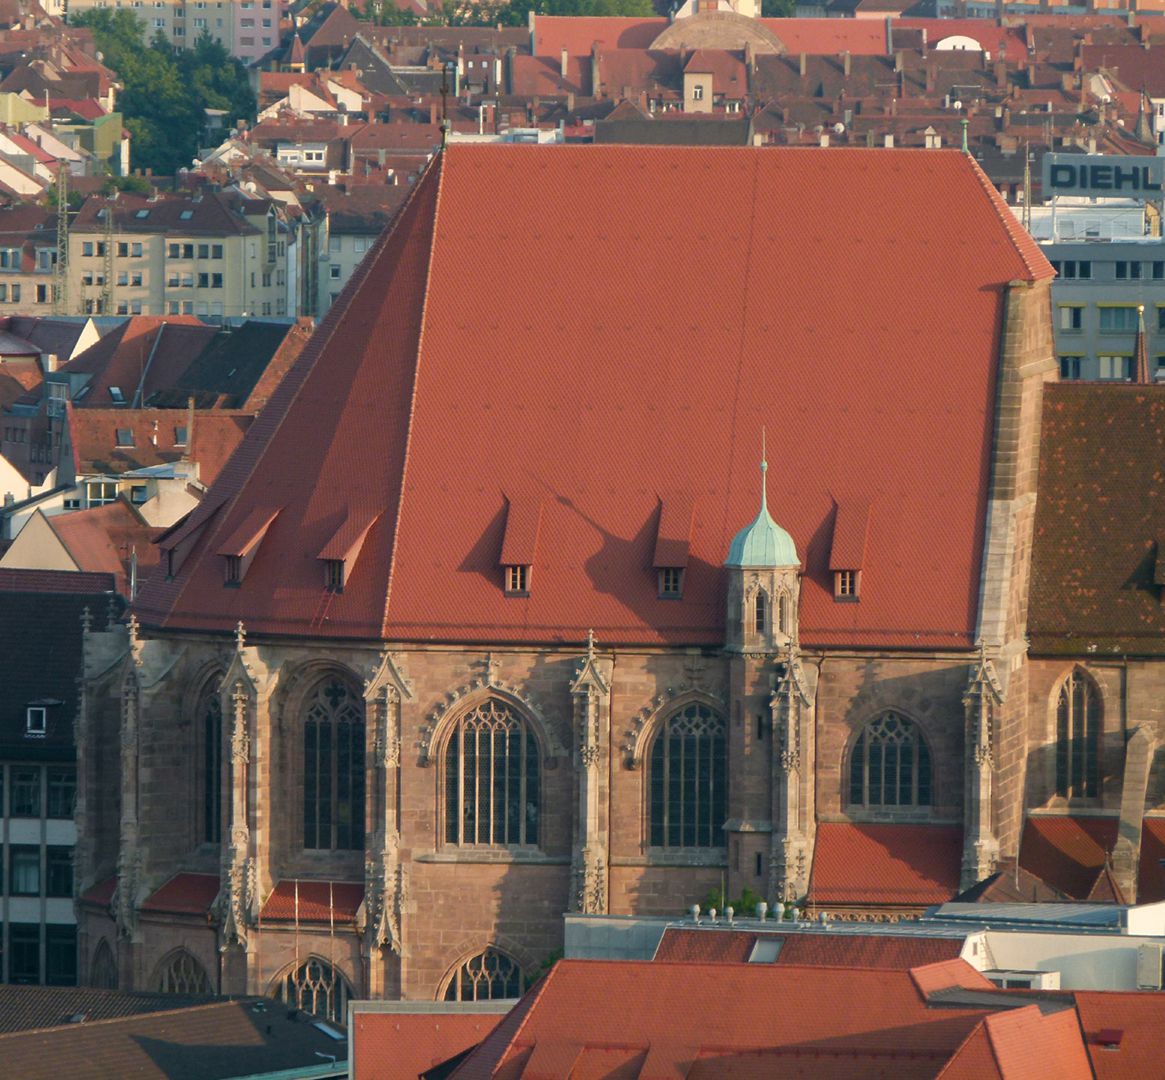 St. Lorenz-Church, choir Choir from the north (with the roof situation that was changed in 2010)